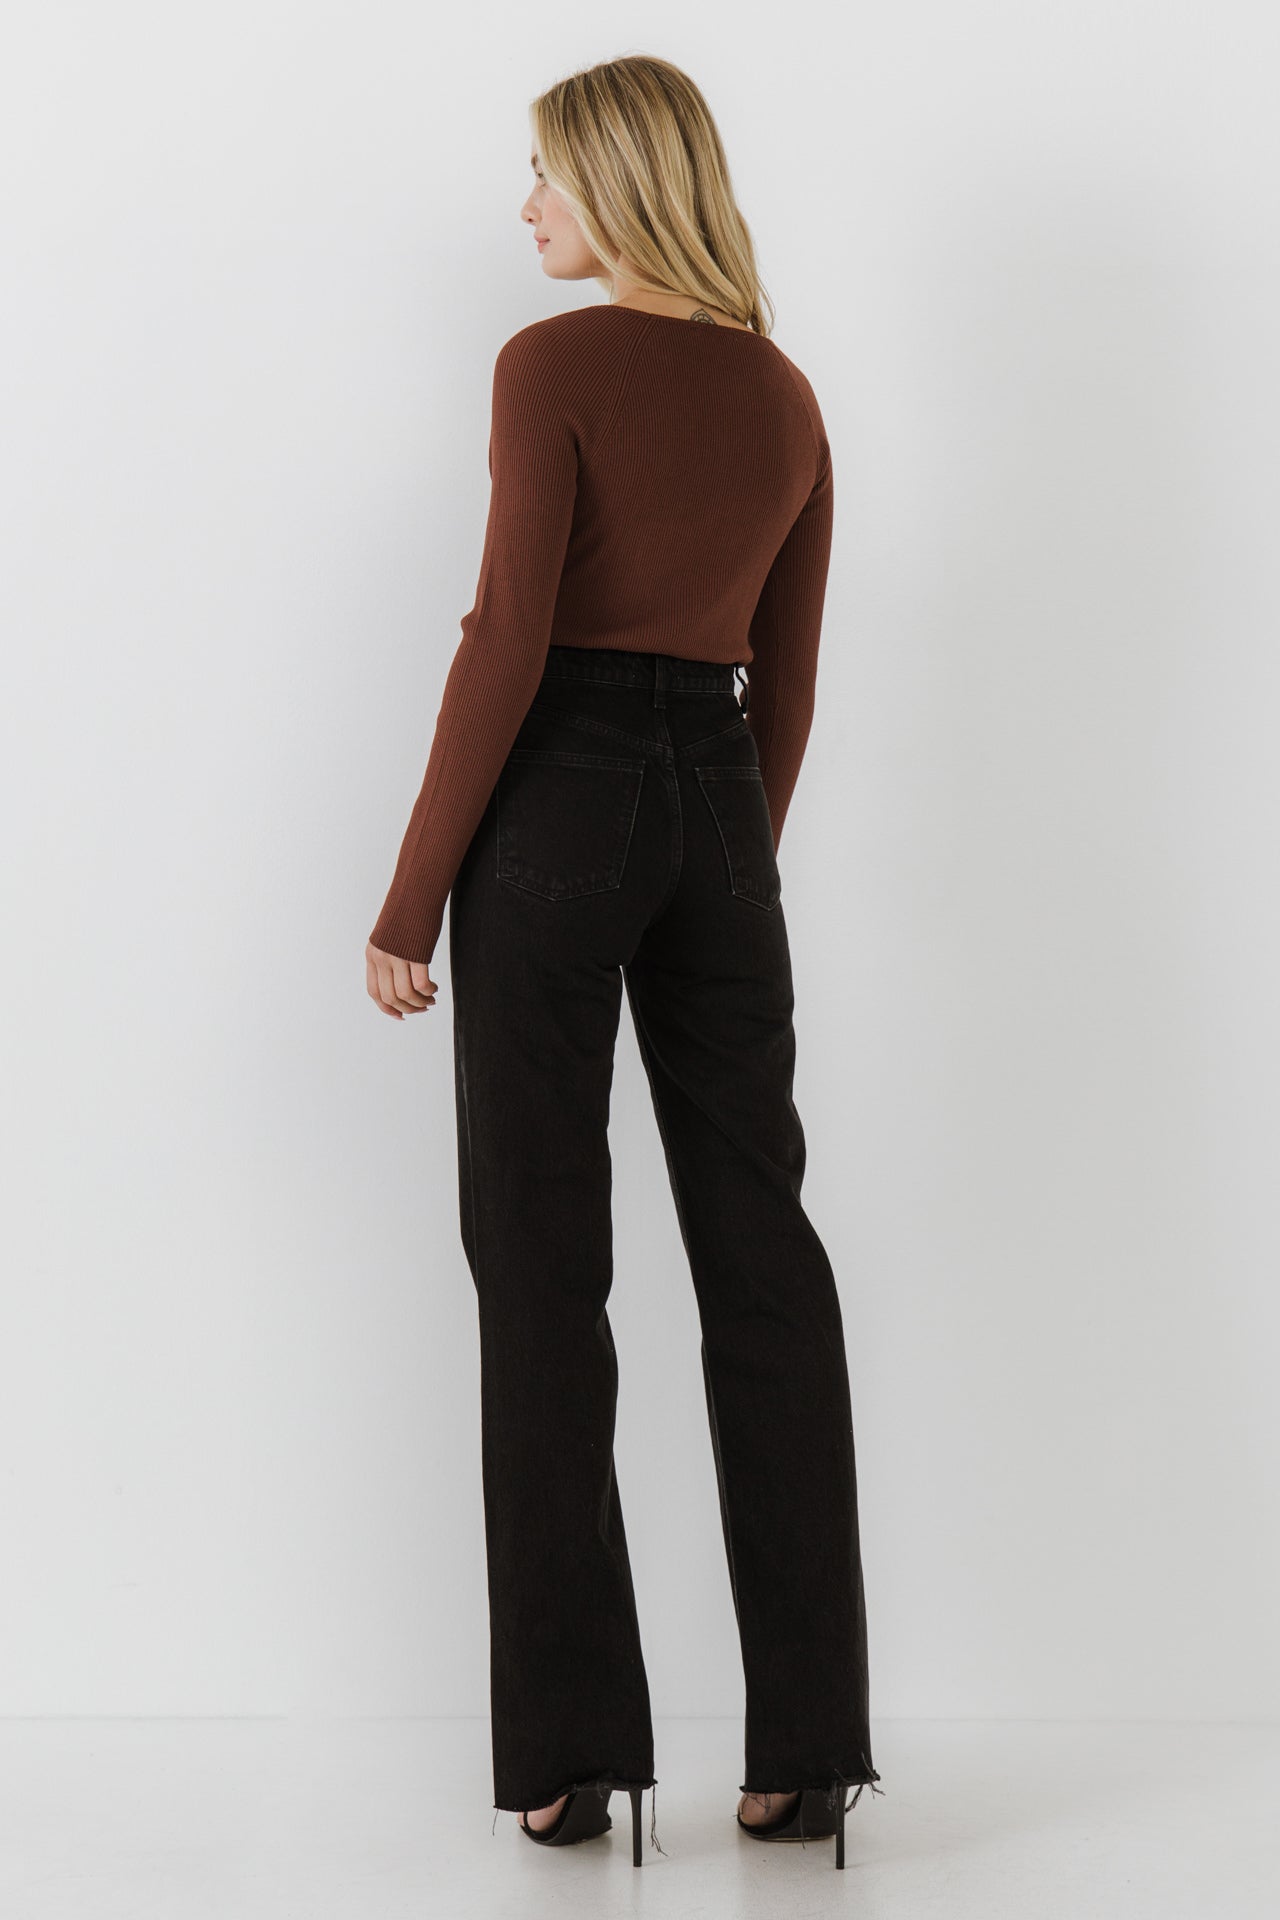 ENDLESS ROSE - Double Cut Out Knit Top - TOPS available at Objectrare